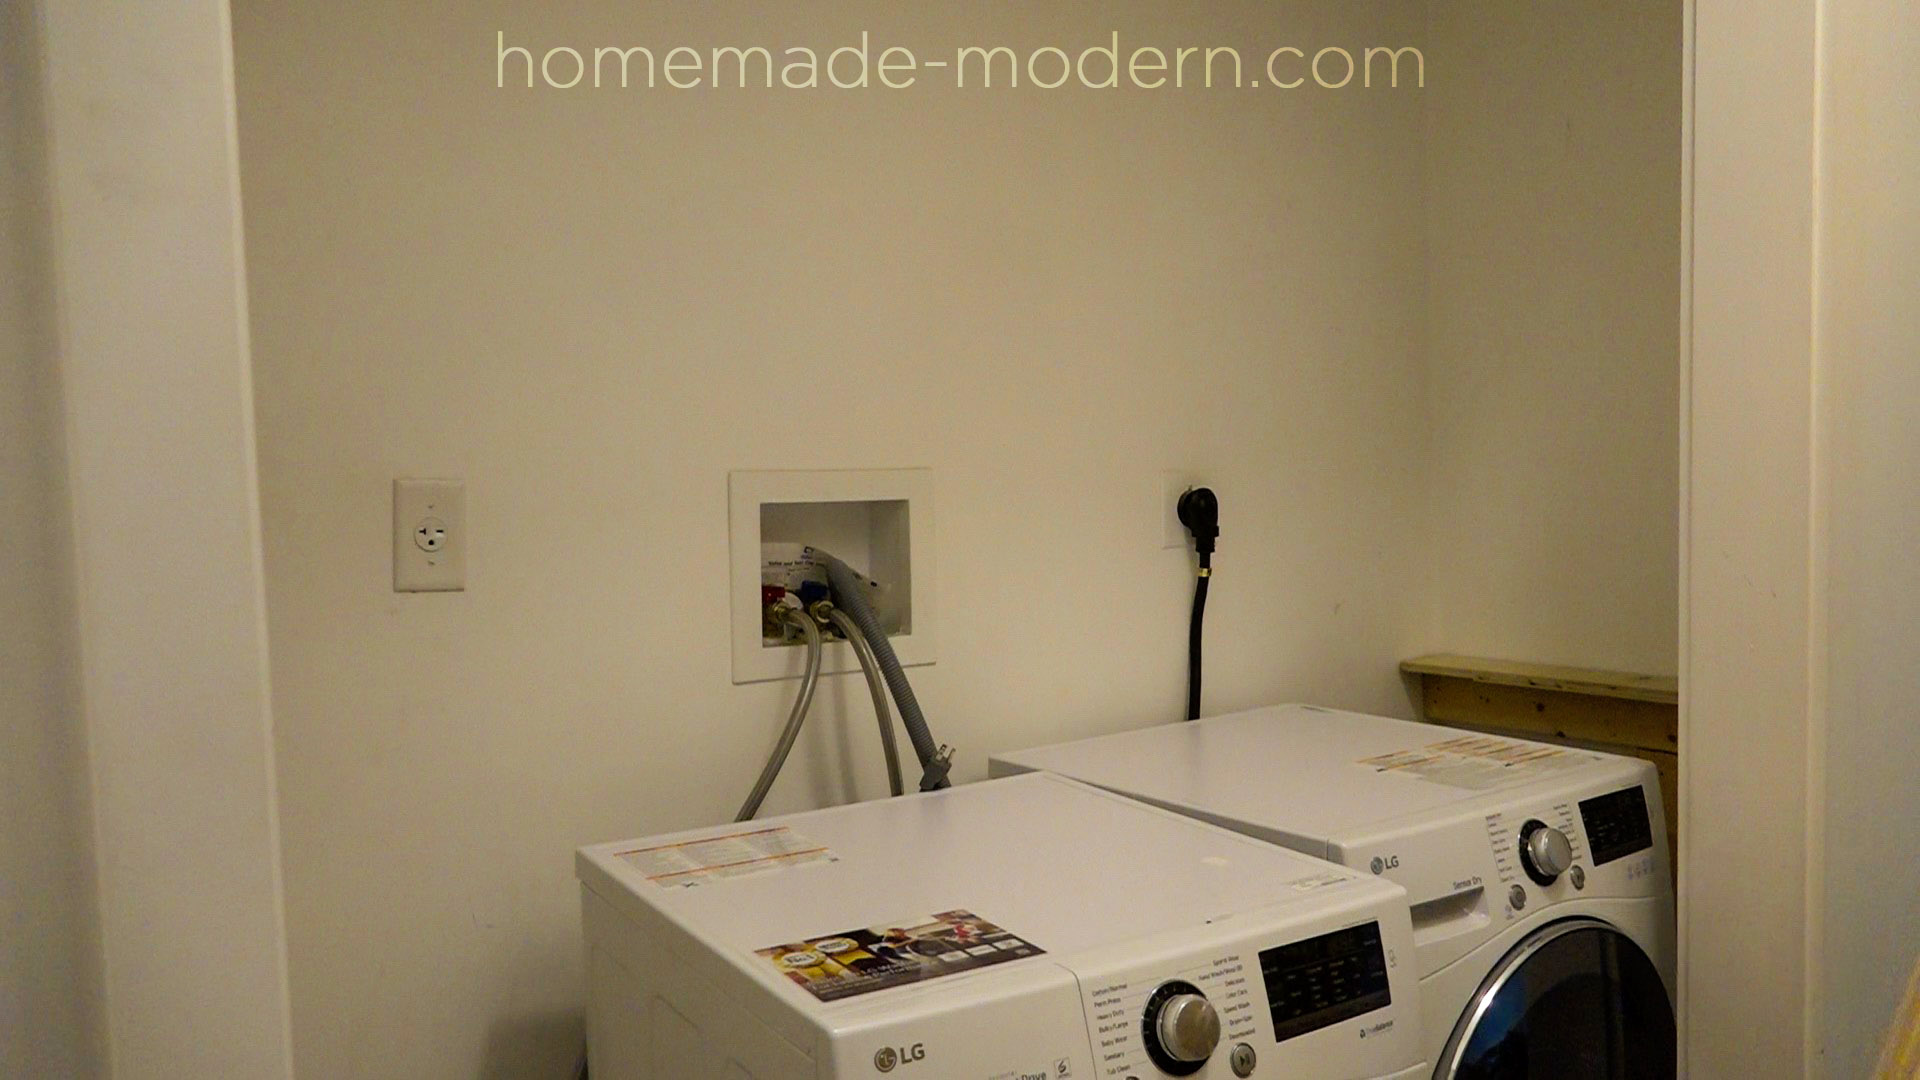 The shelving for this DIY Laundry Room was made out ¾” plywood from Home Depot. Everything was designed it so that it only requires a circular saw, a drill and less than $150 worth of materials. Full instructions can be found at HomeMade-modern.com